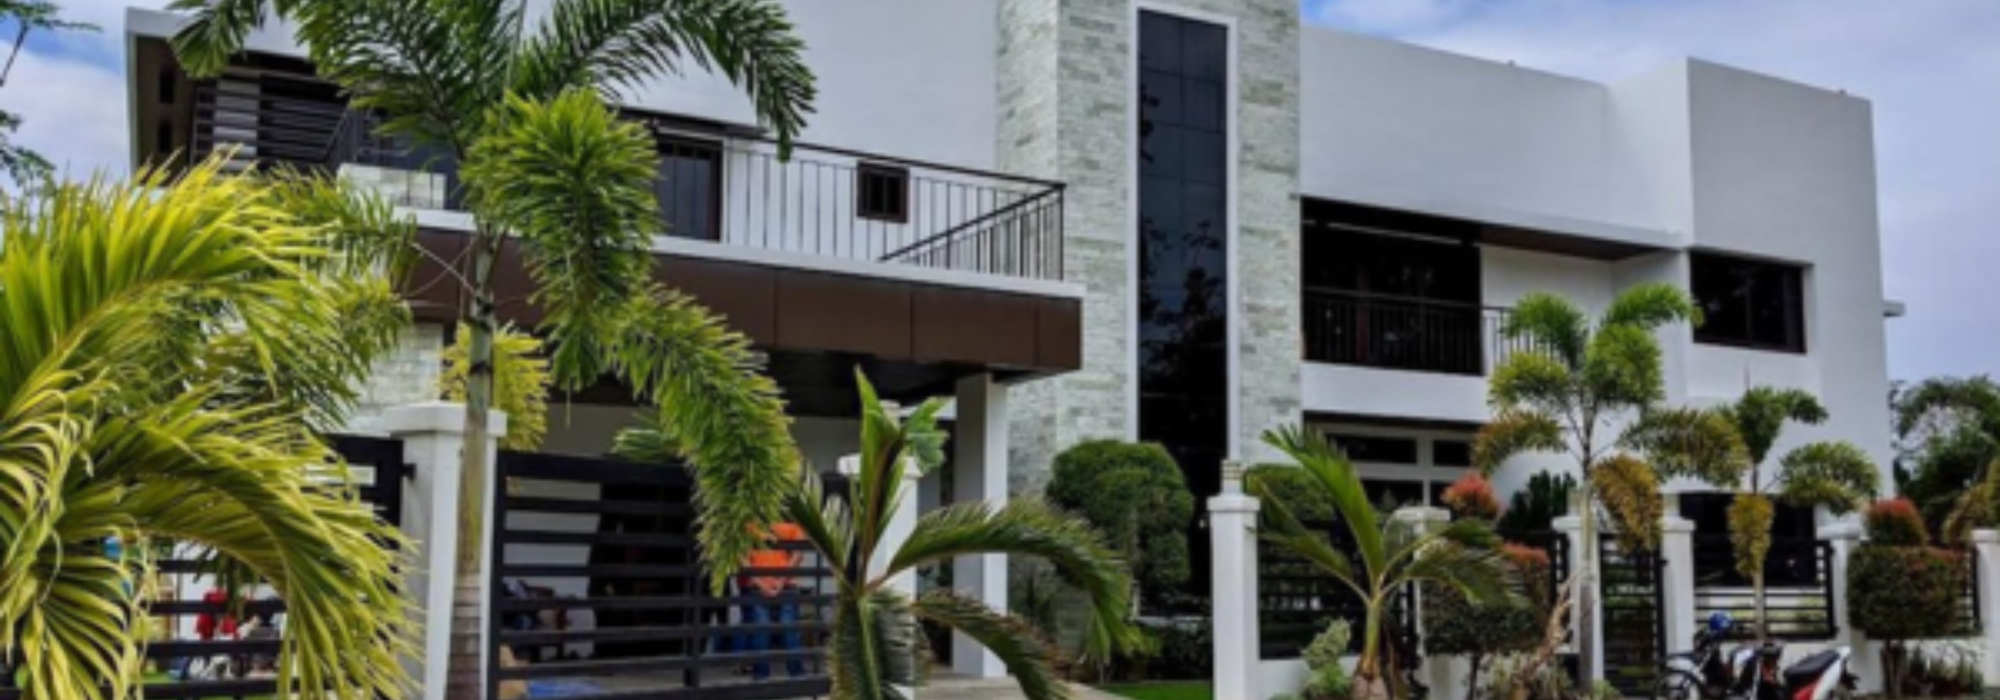 5 Bedroom House for sale in Canito-An, Misamis Oriental